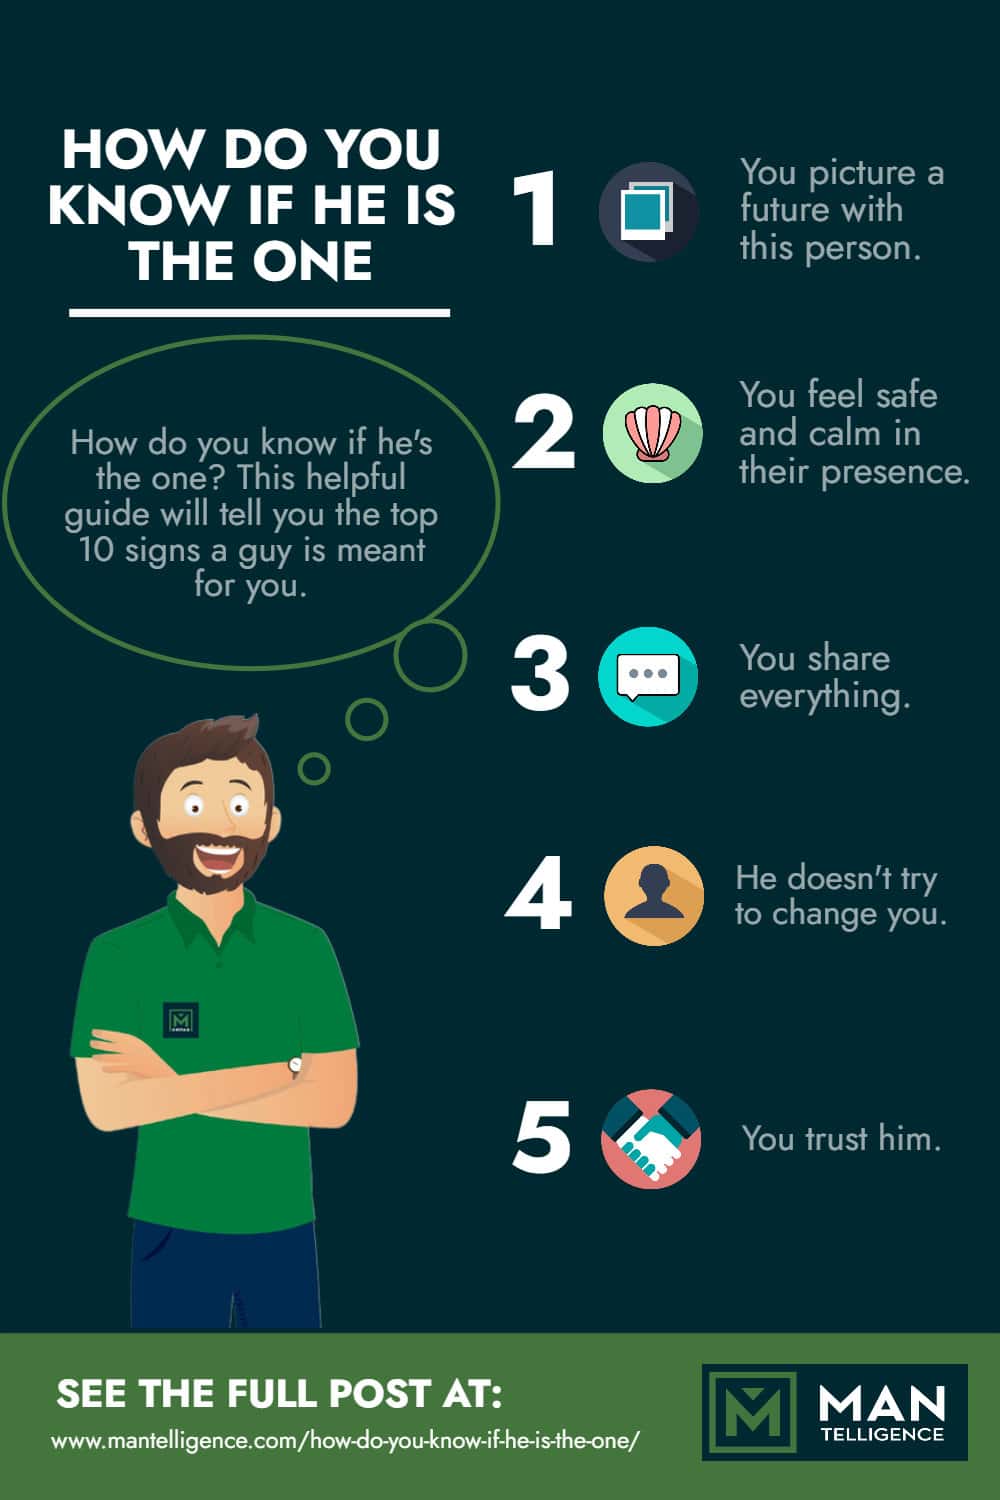 How do you know if he's the one - Infographic